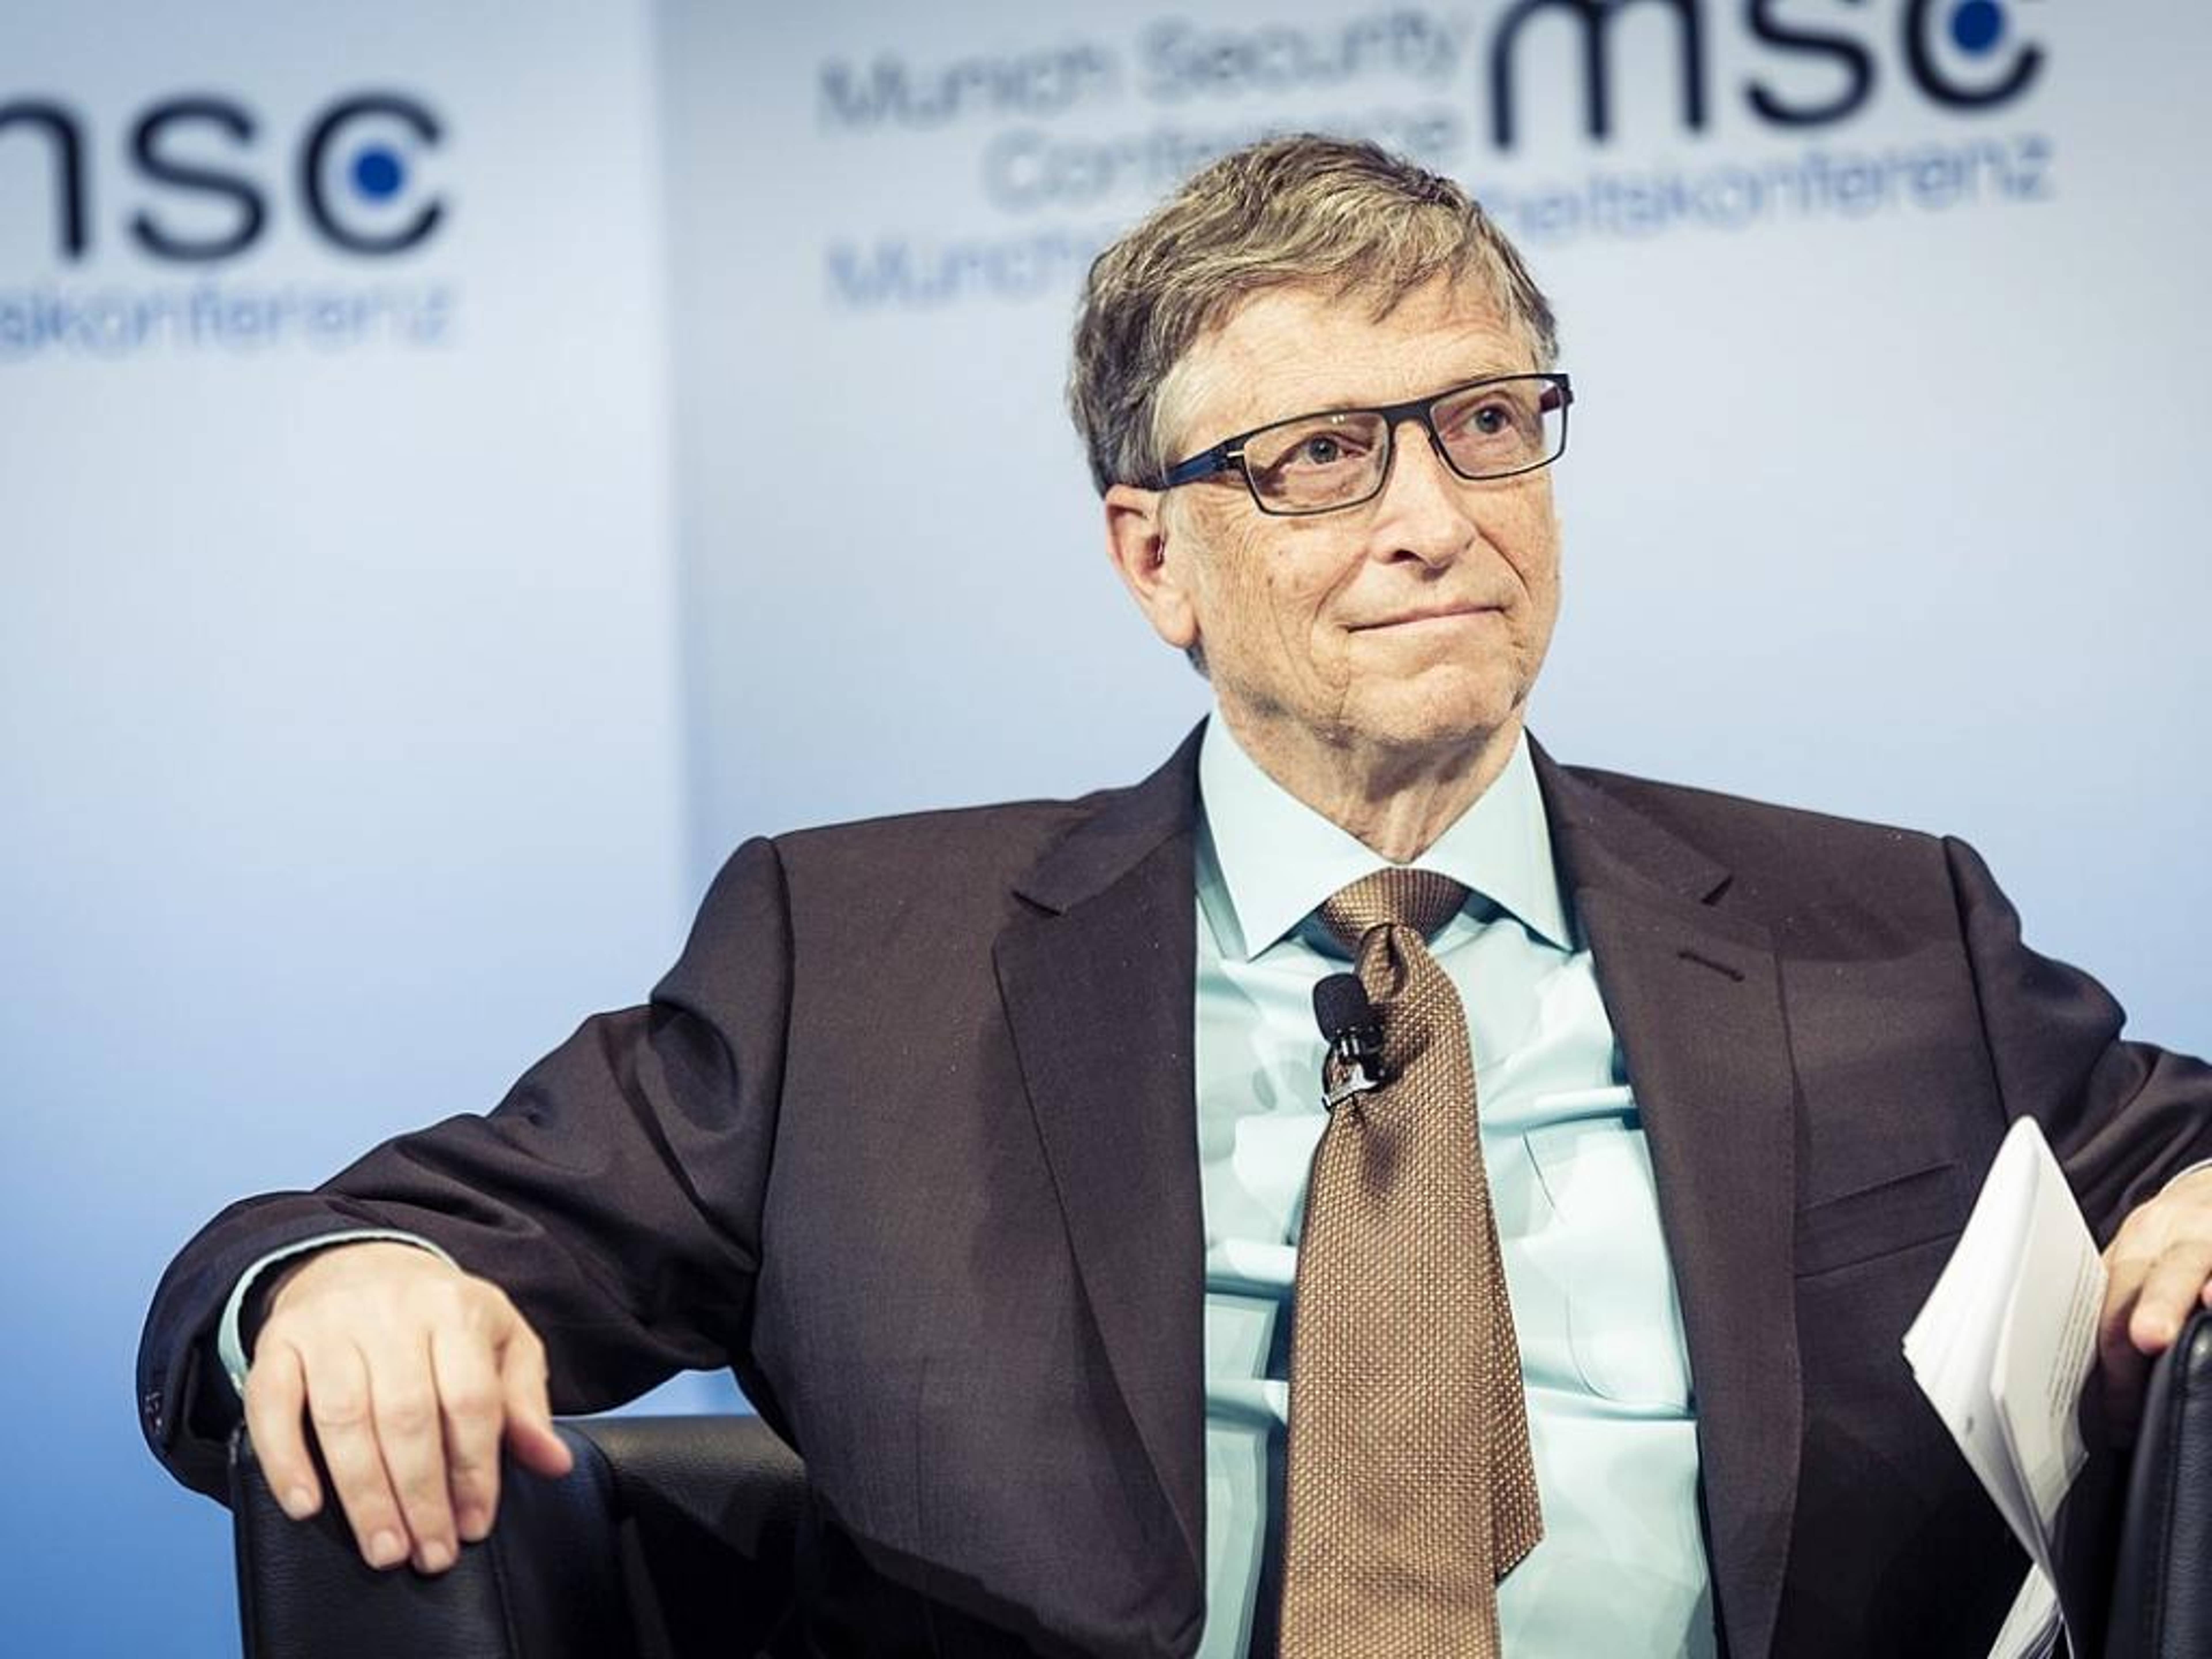 5 Things You Might Not Know About Bill Gates: Did He Really Start His First Co. At Age 15?